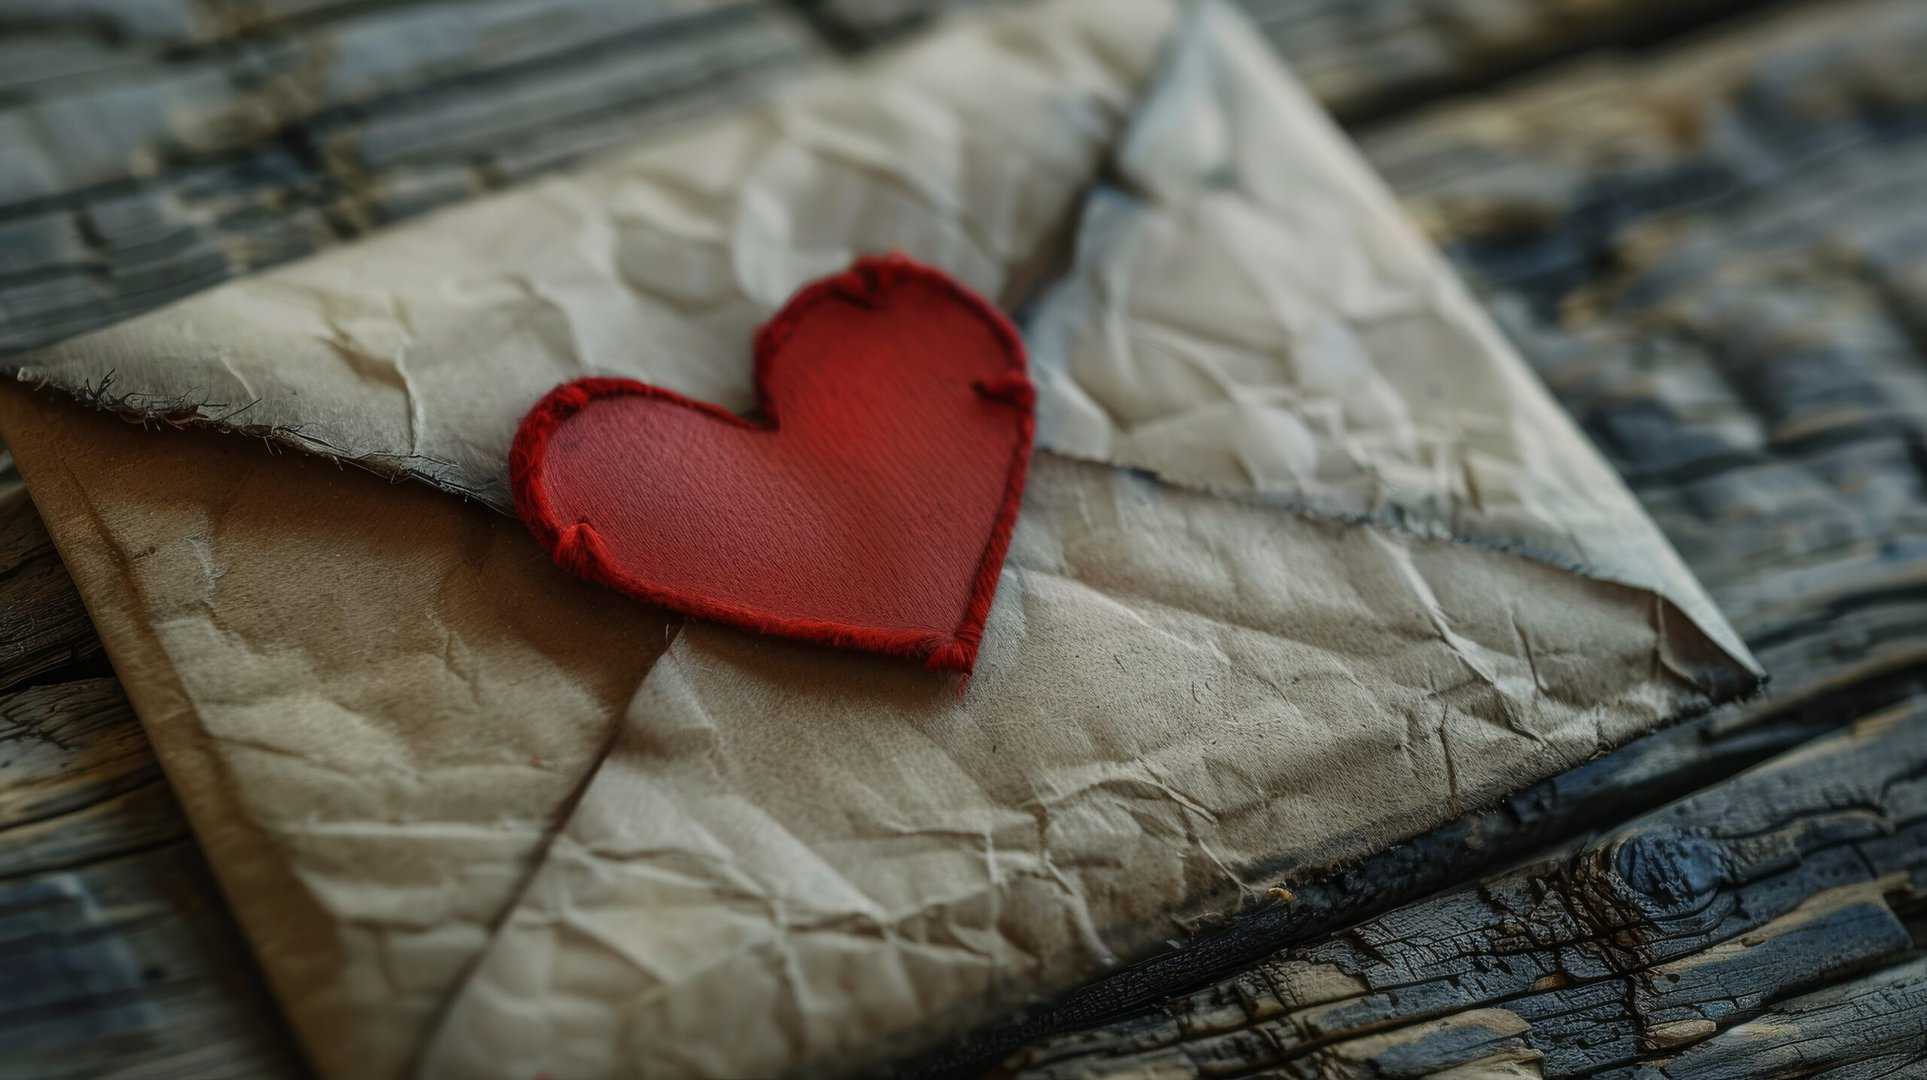 A closeup of a crumpled, unopened envelope with a red heart as the seal.